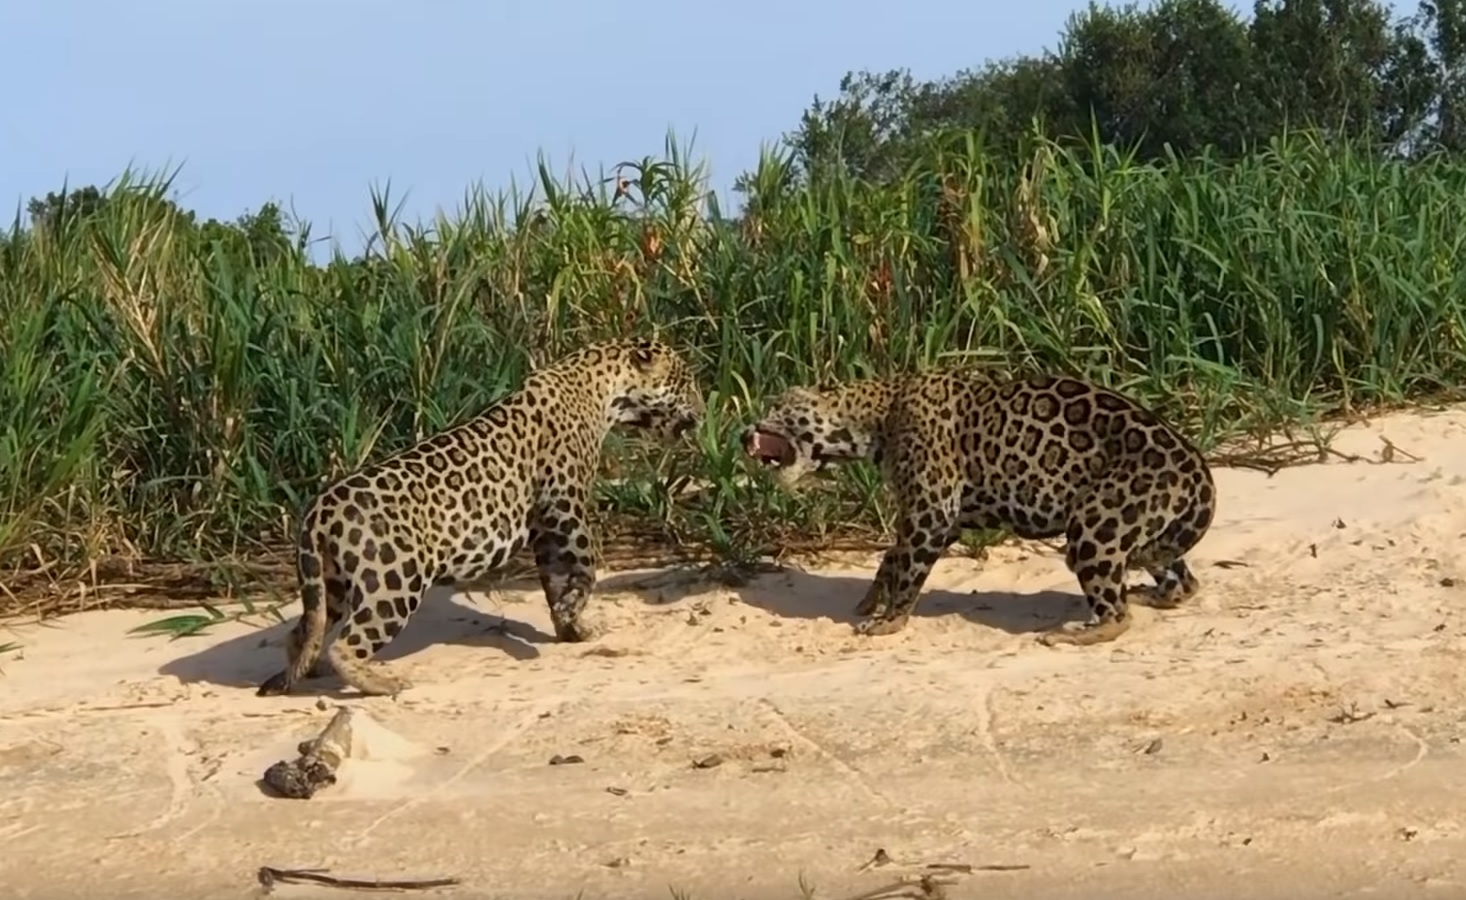 Male Jaguars Fight For Territory